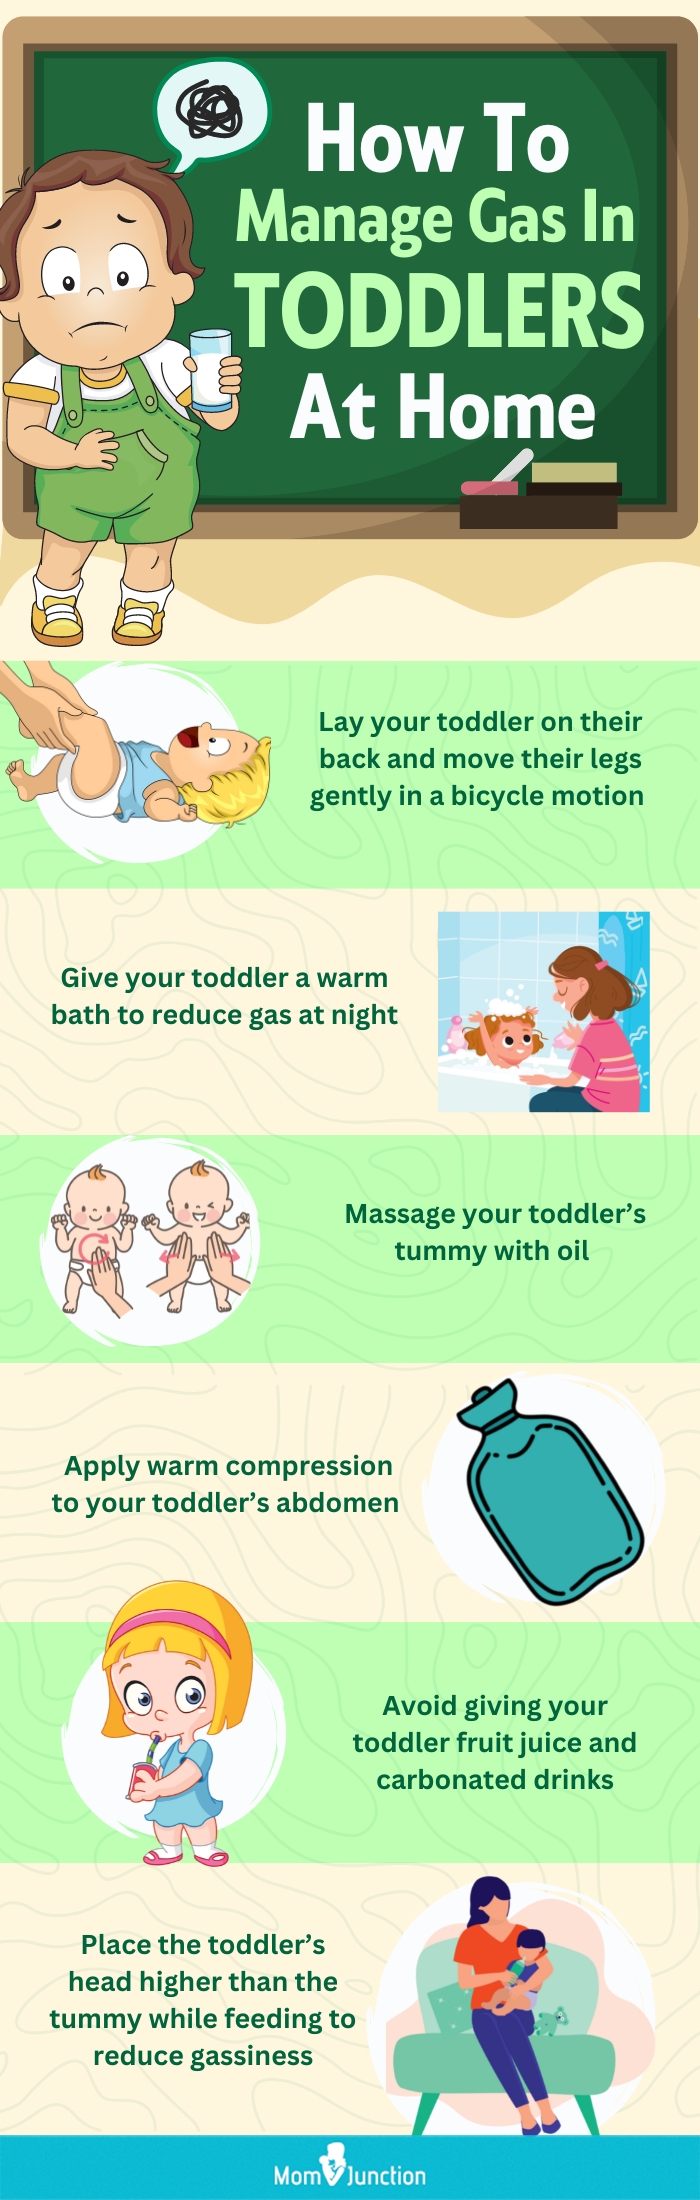 how to manage gas in toddlers at home (infographic)